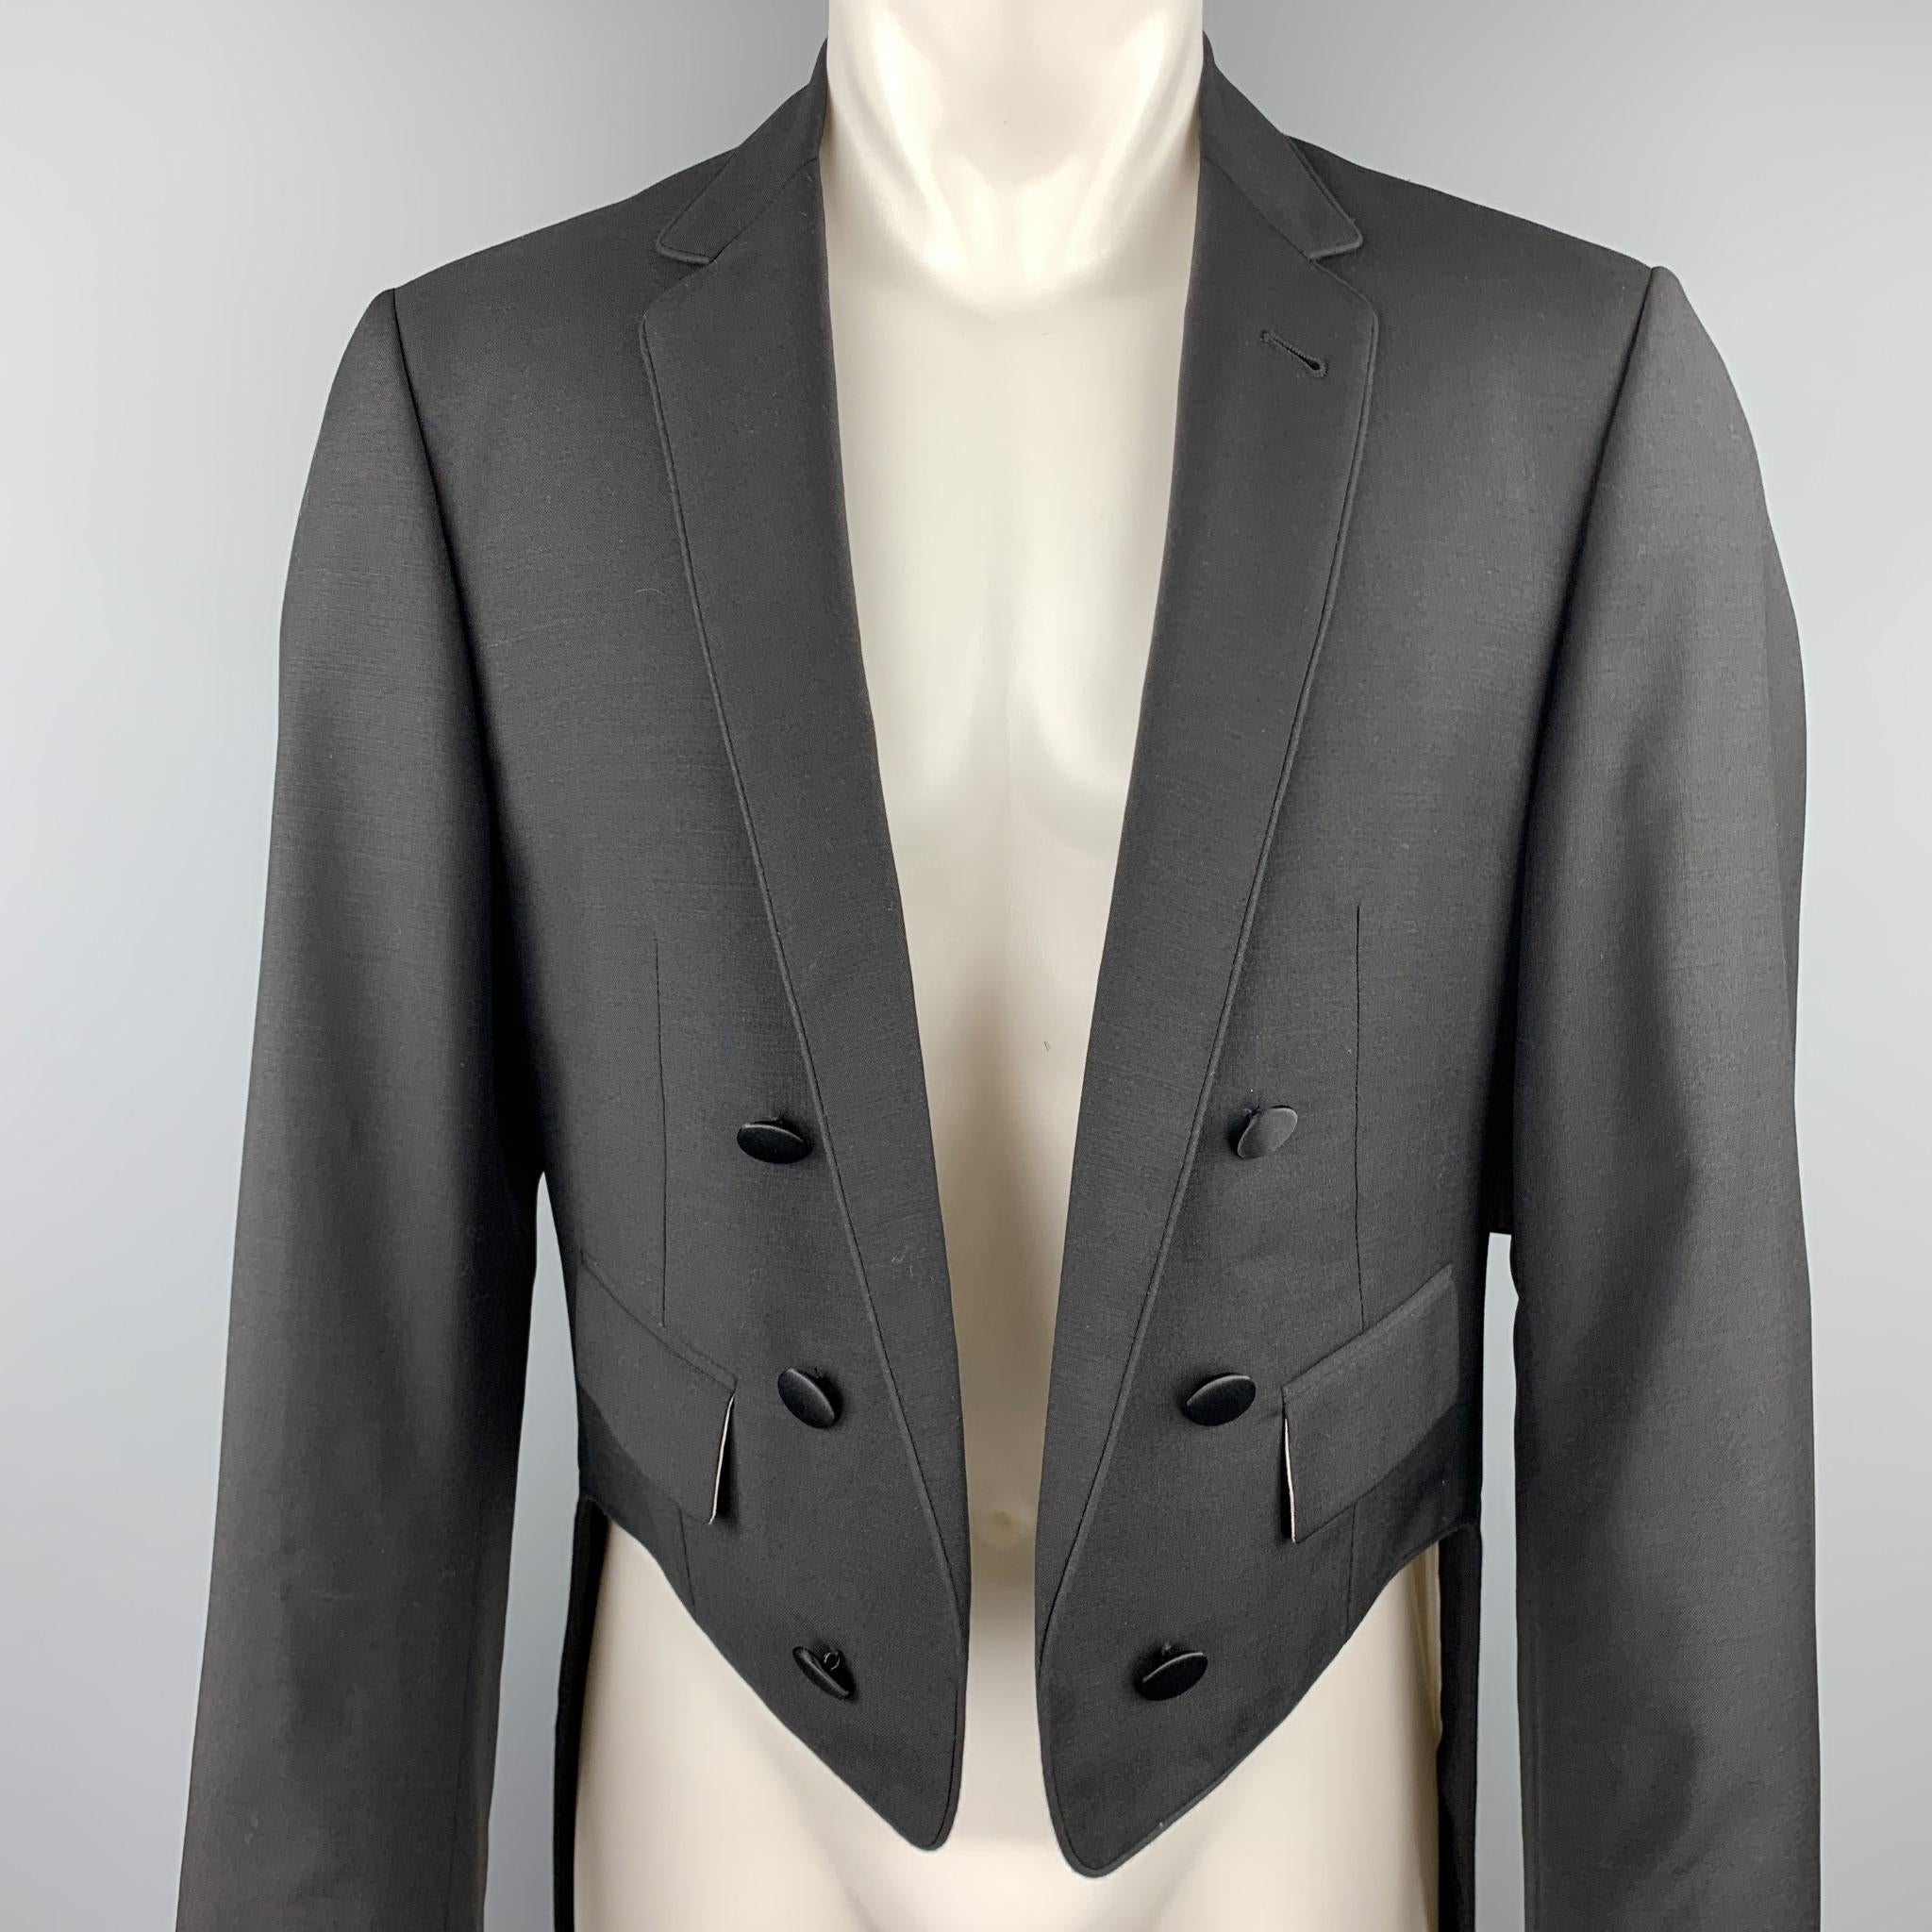 BLACK FLEECE jacket comes in black wool with a notch lapel open cropped front, satin piping, and coat tails back. Made in Italy.

New with Tags. 
Marked: BB 3

Measurements:

Shoulder: 18 in.
Chest: 44 in.
Sleeve: 25.5 in.
Length: 22-43 in.